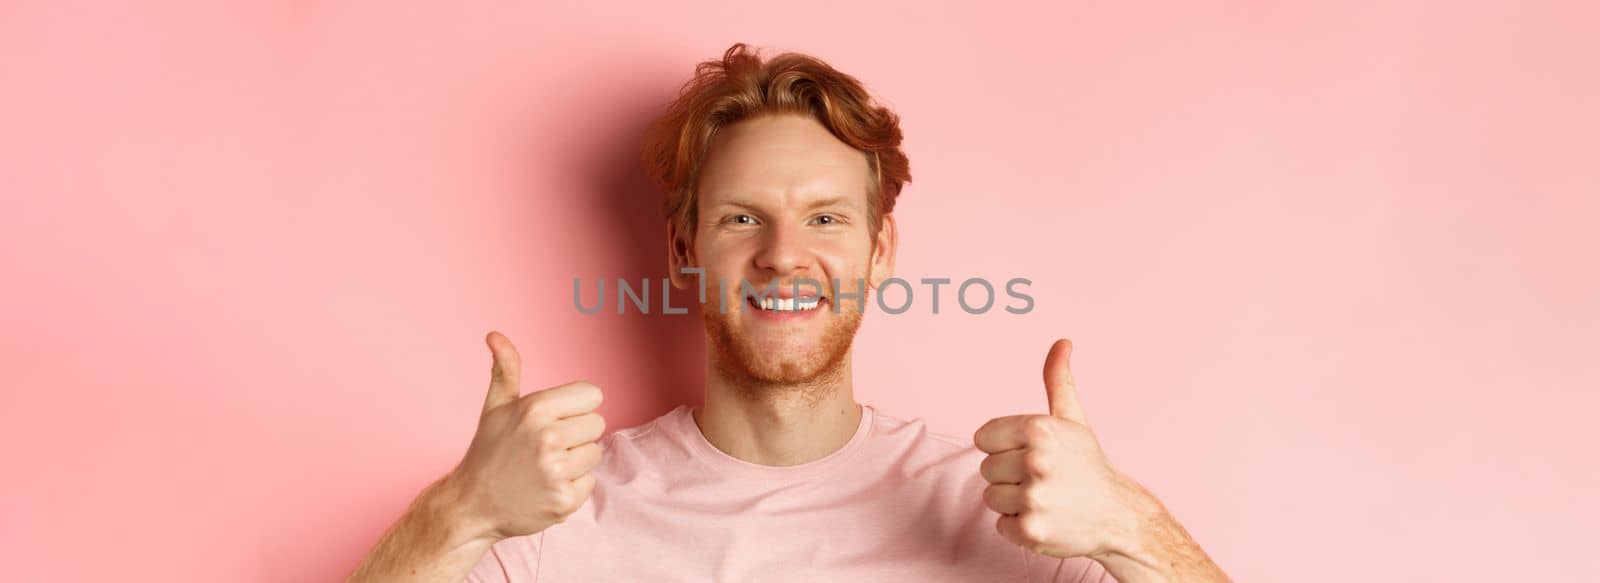 Close up of cheerful man with red hair and beard, showing thumbs up and smiling, saying yes, approve and praise something cool, standing over pink background.